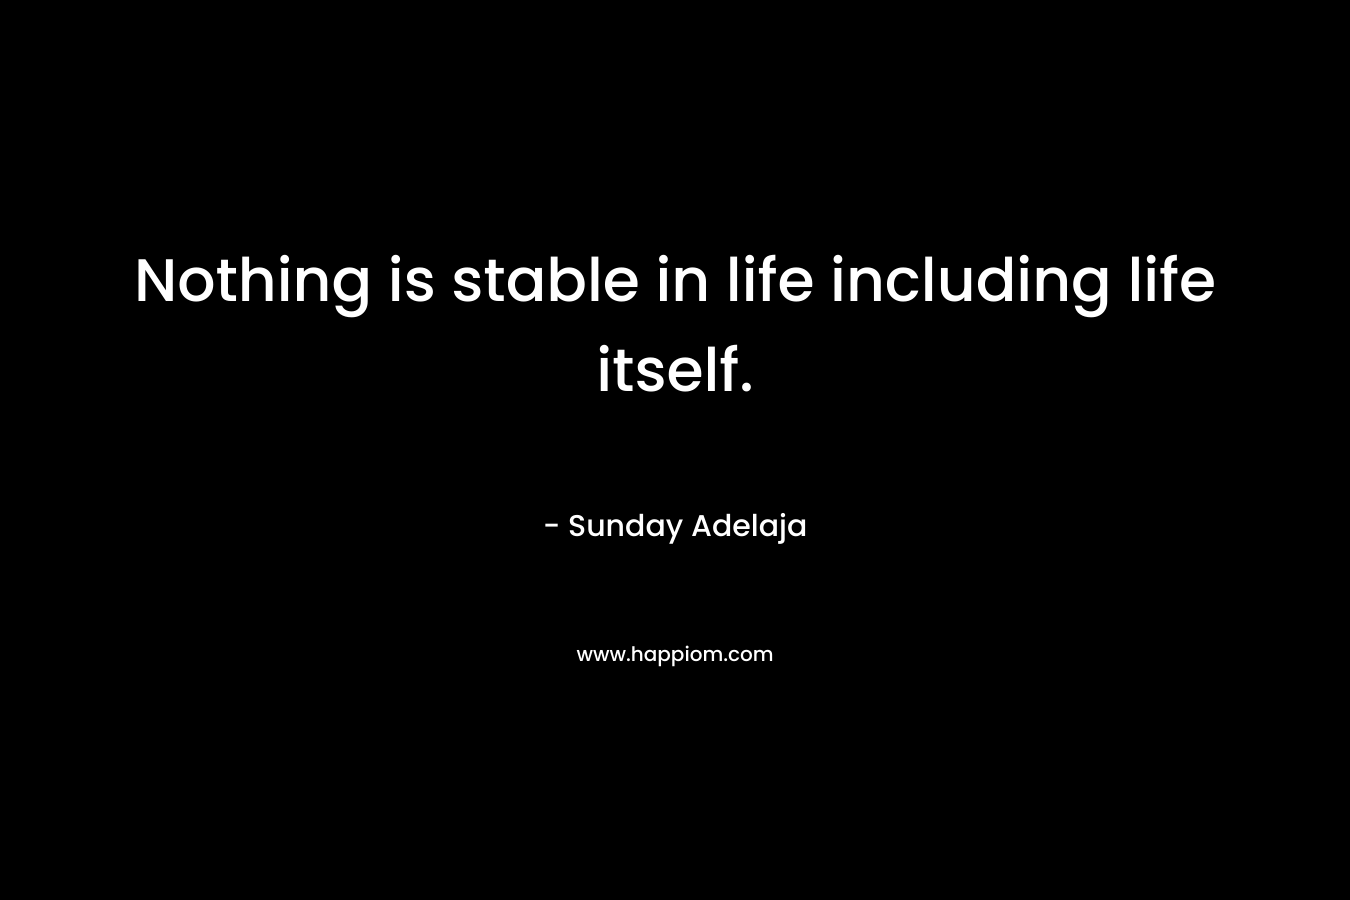 Nothing is stable in life including life itself.